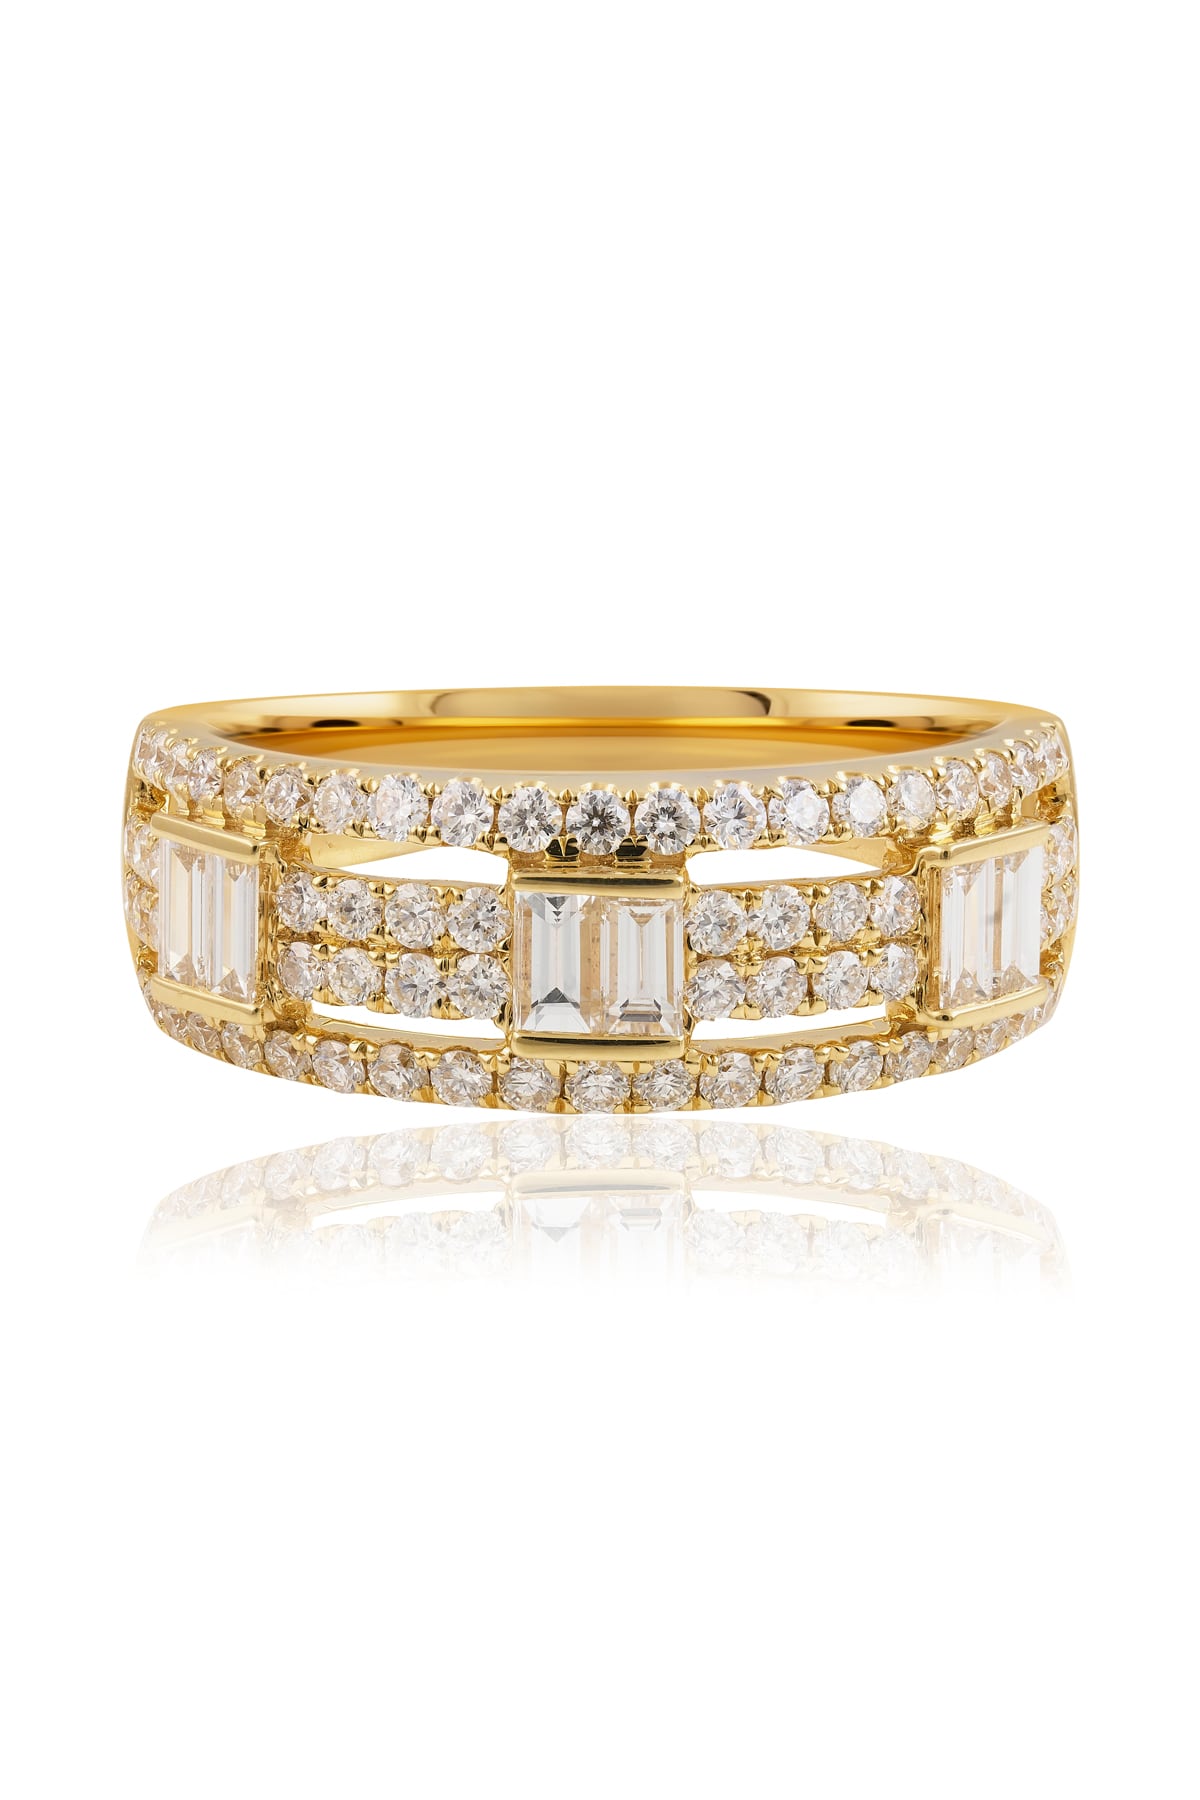 Baguette Cut Diamond Dress Ring In Yellow Gold from LeGassick Jewellery.